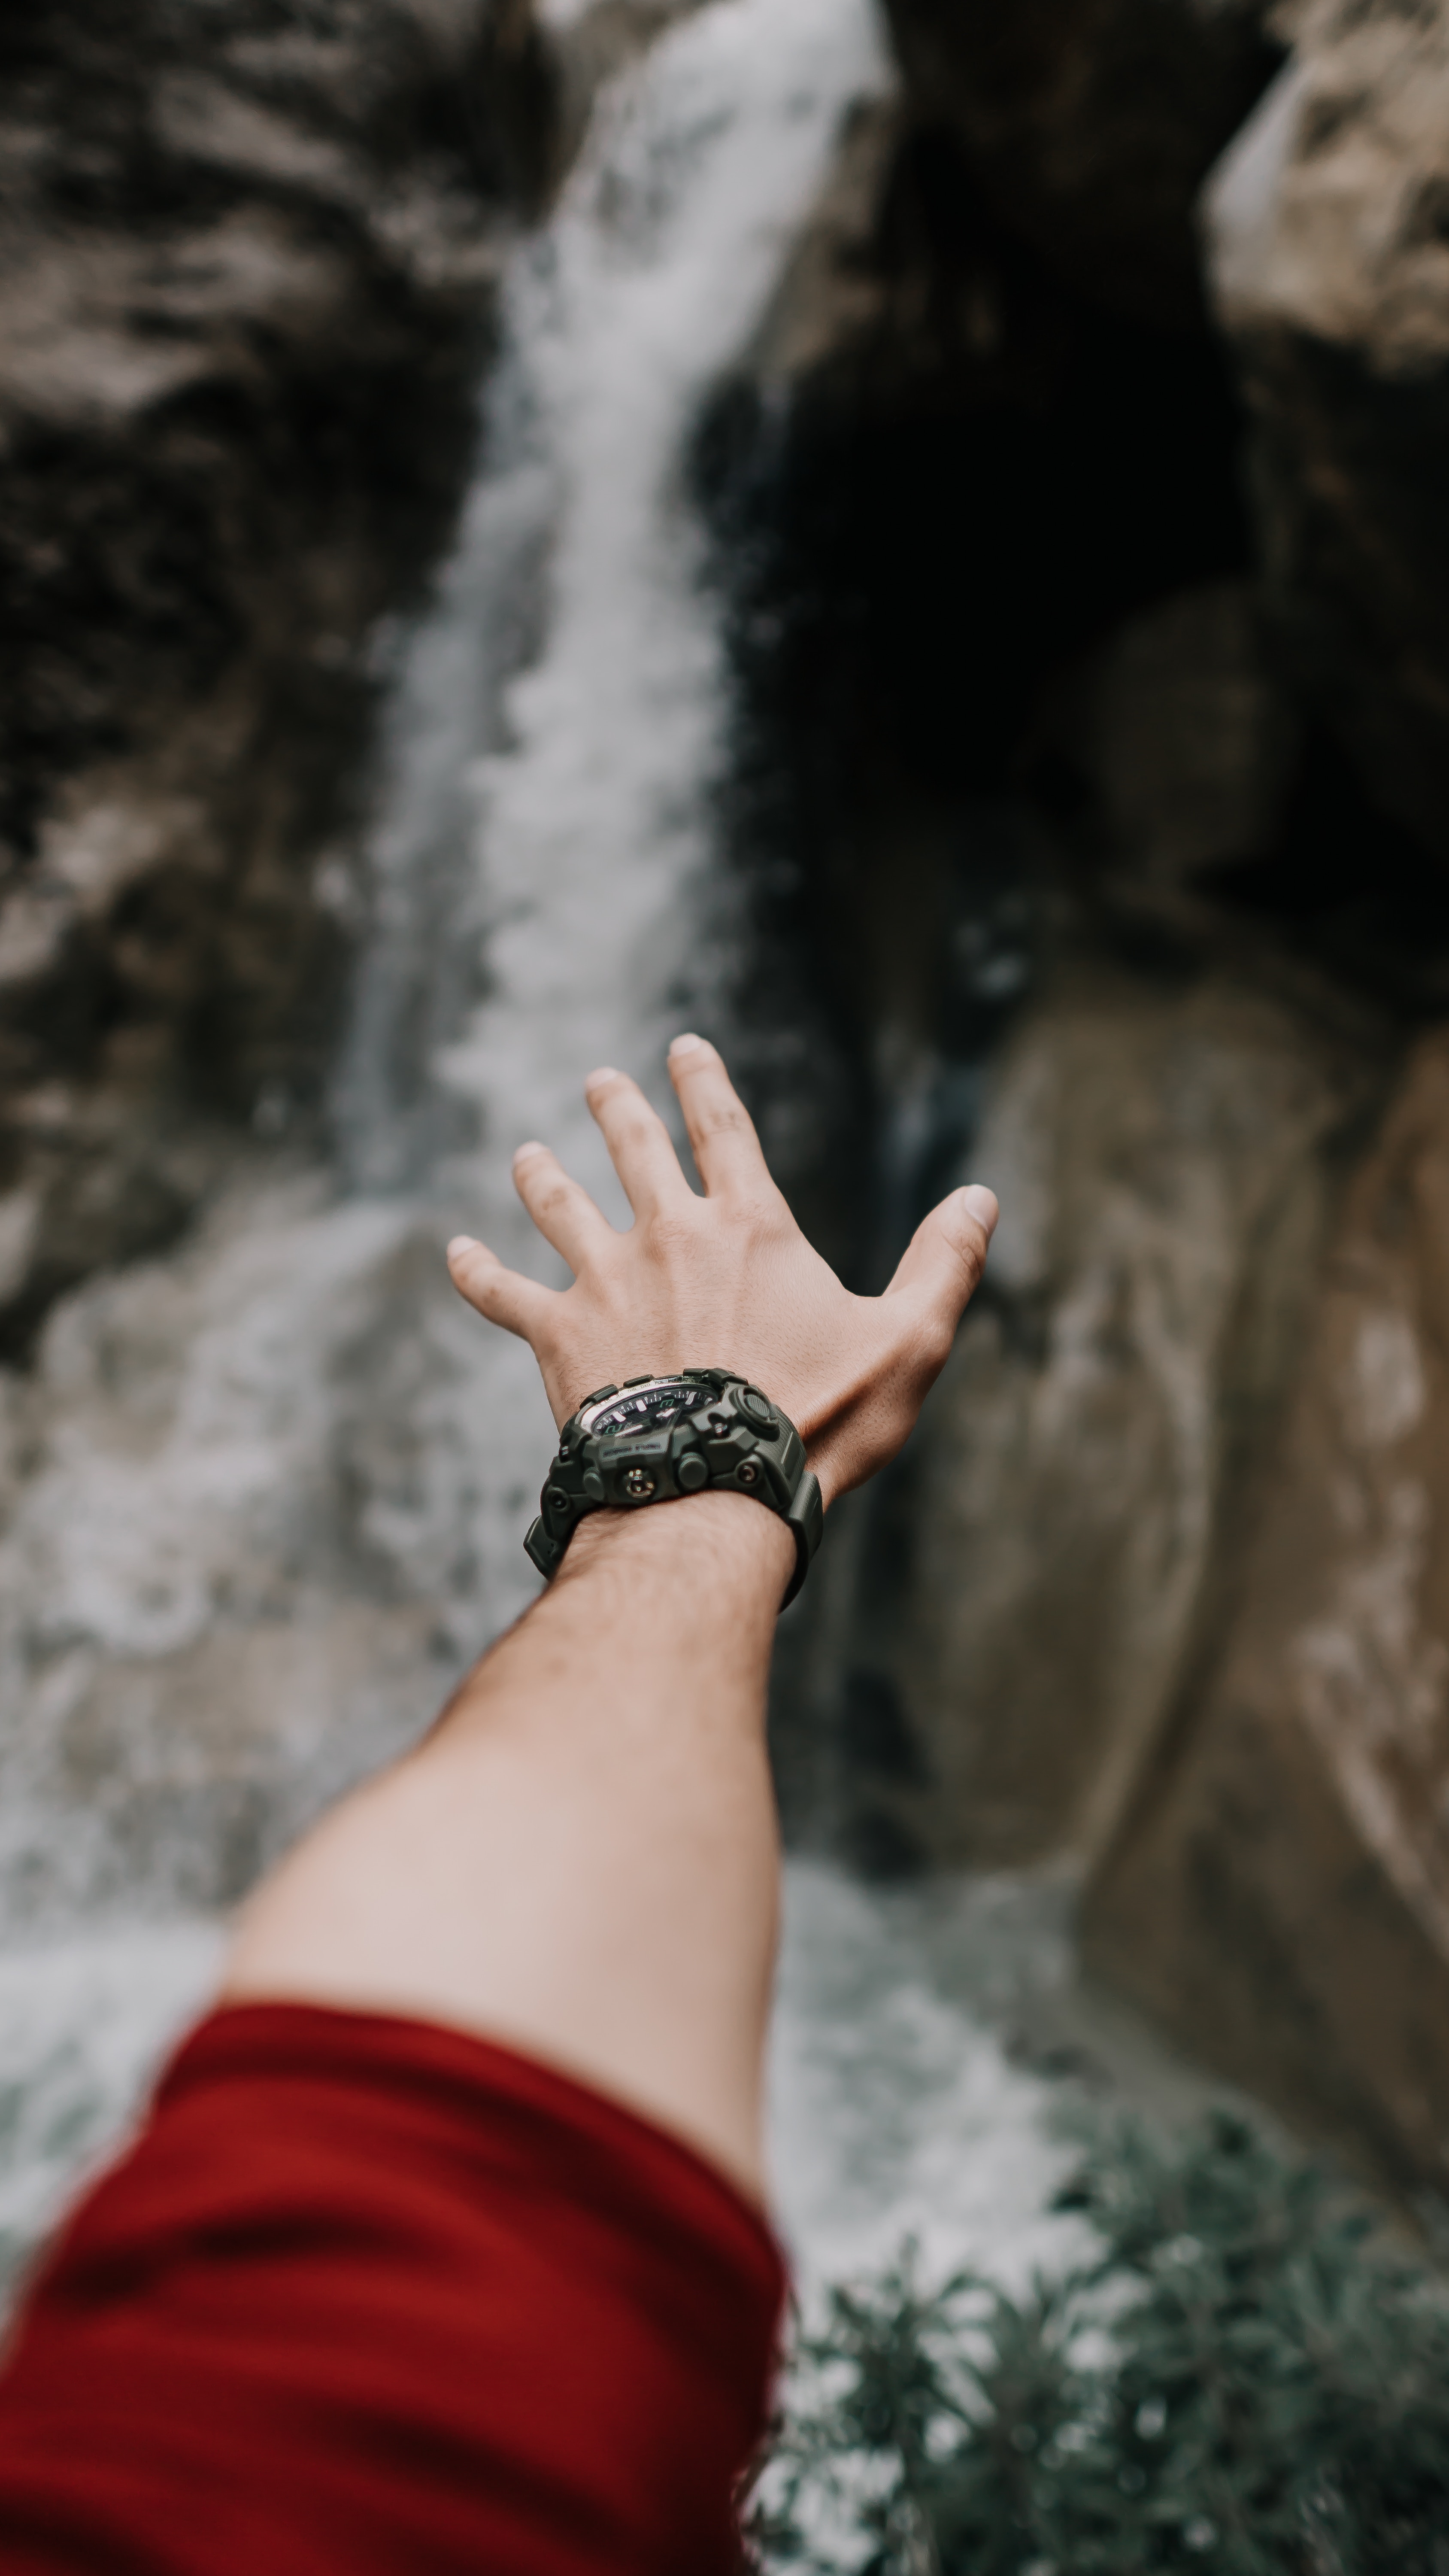 129321 download wallpaper wrist watch, hand, miscellanea, miscellaneous, waterfall, wristwatch, fingers screensavers and pictures for free